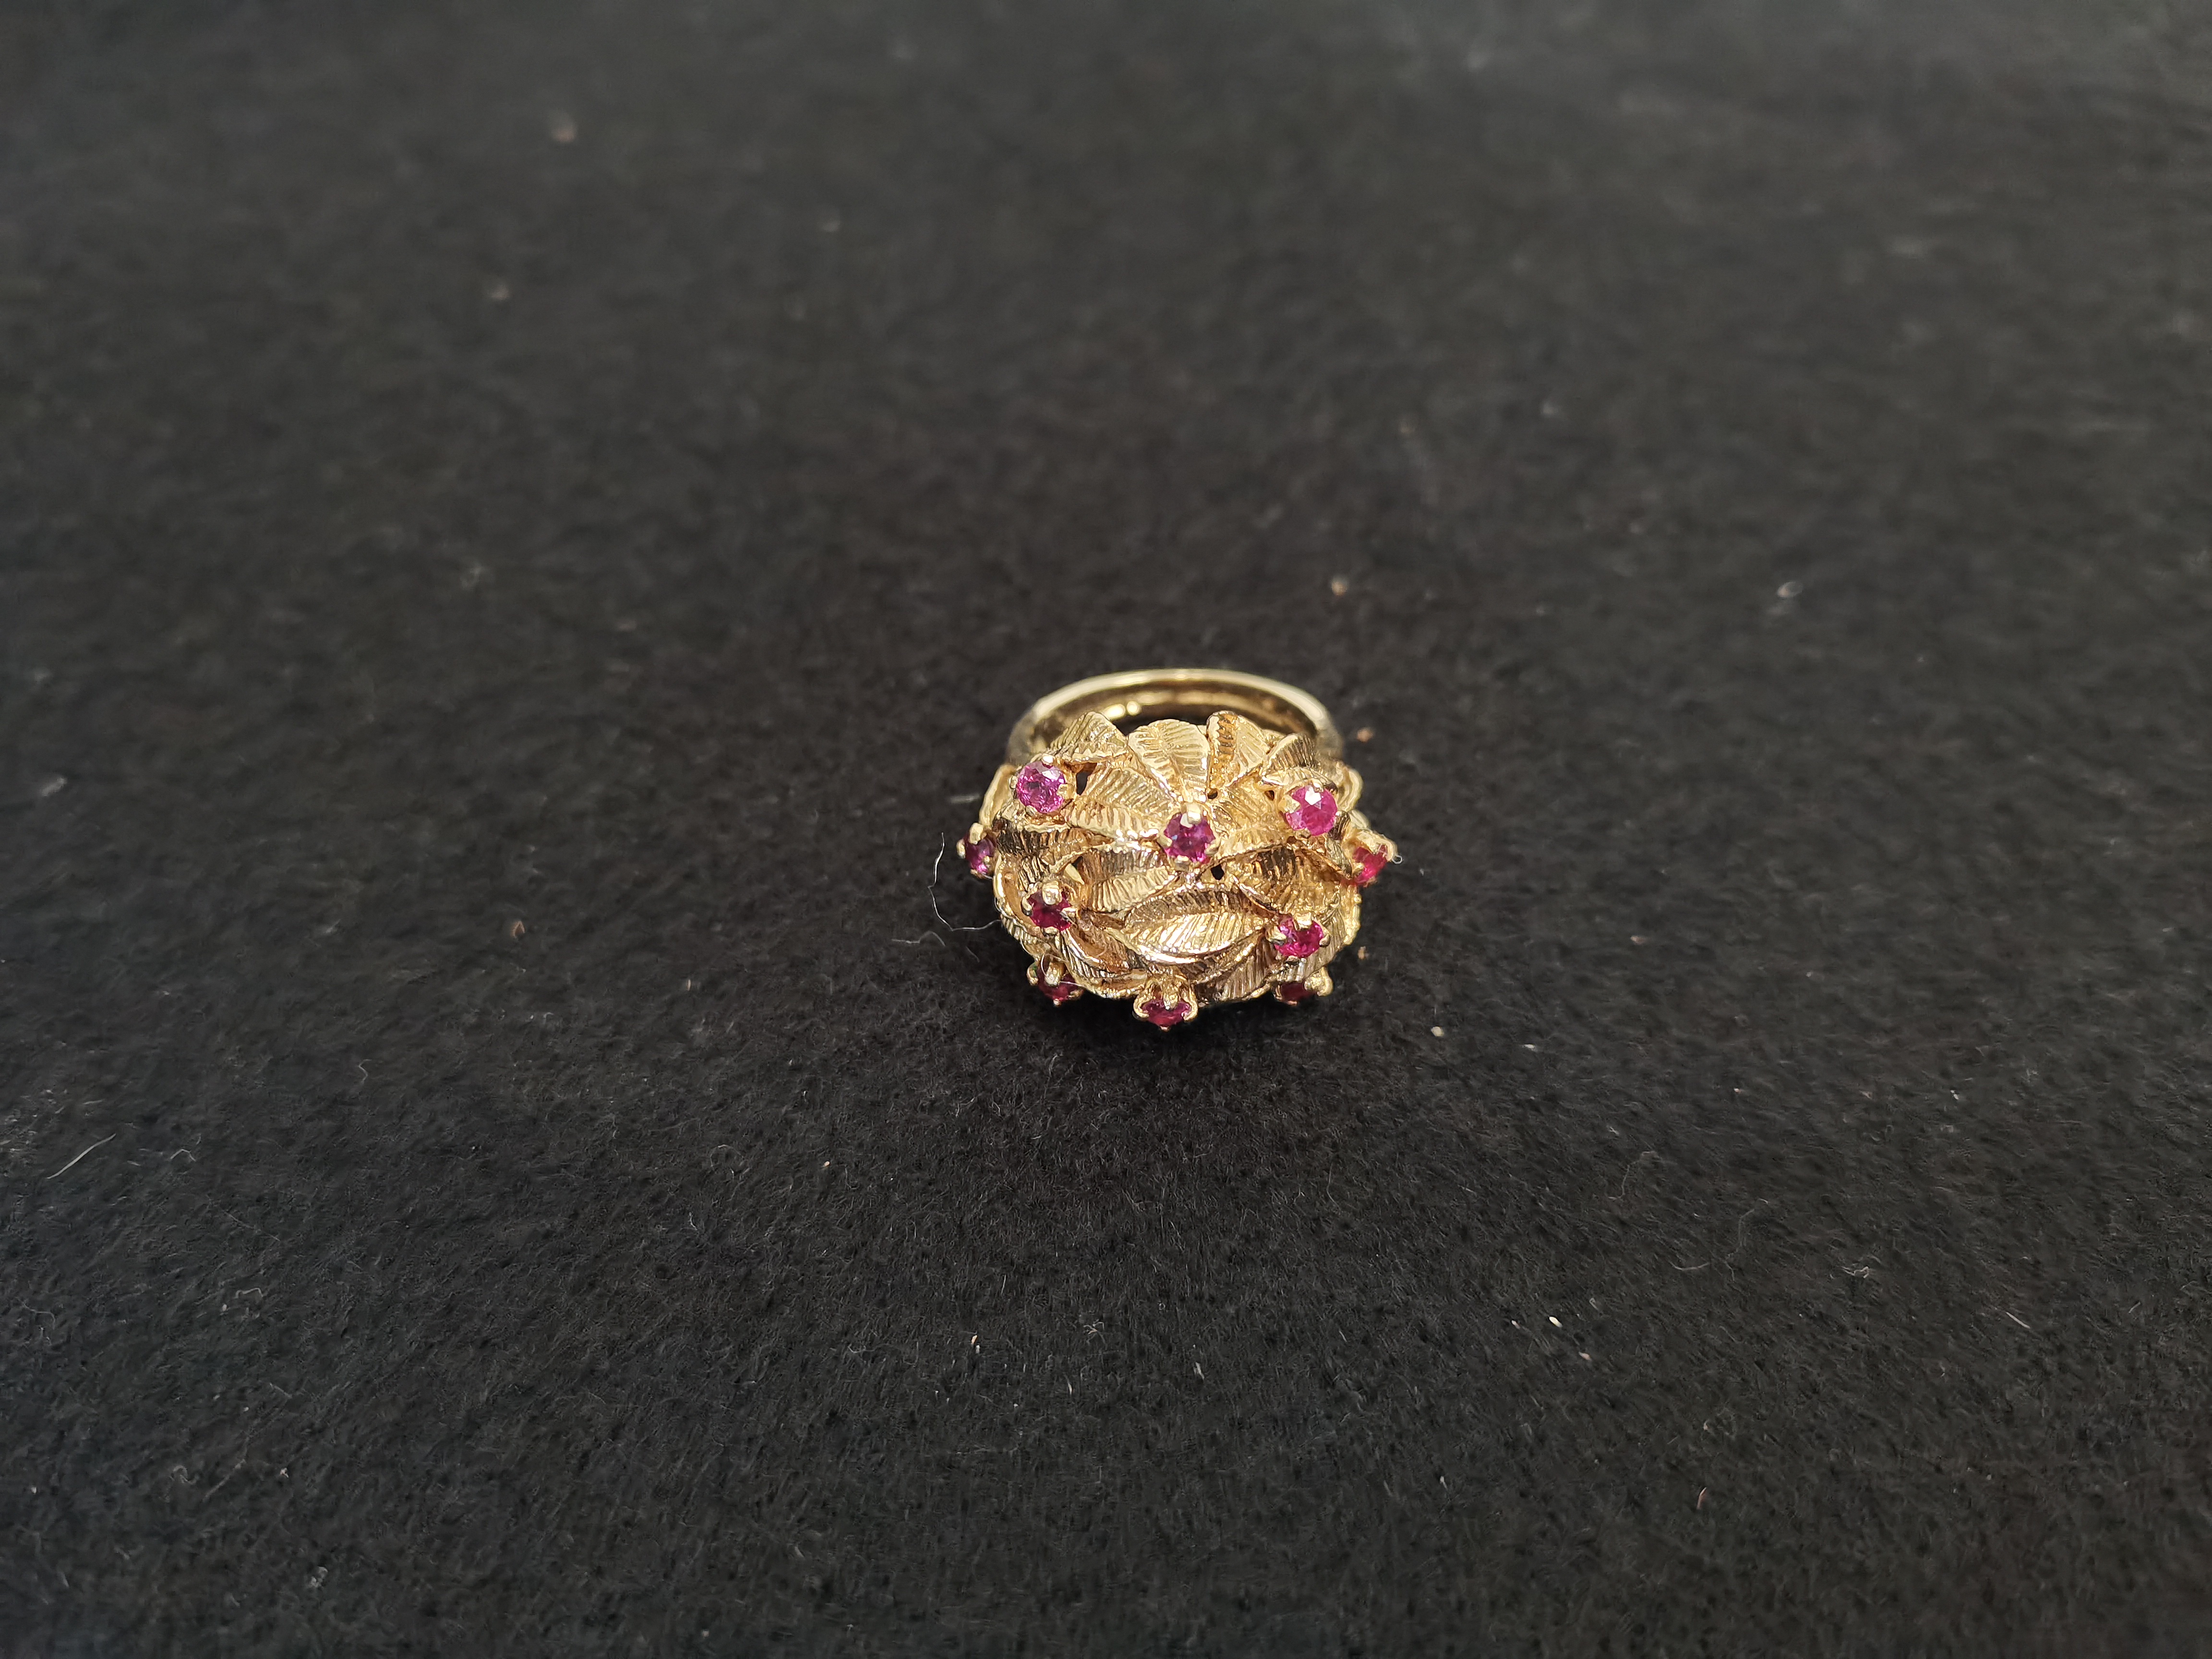 9ct gold ring 8g - Image 2 of 4